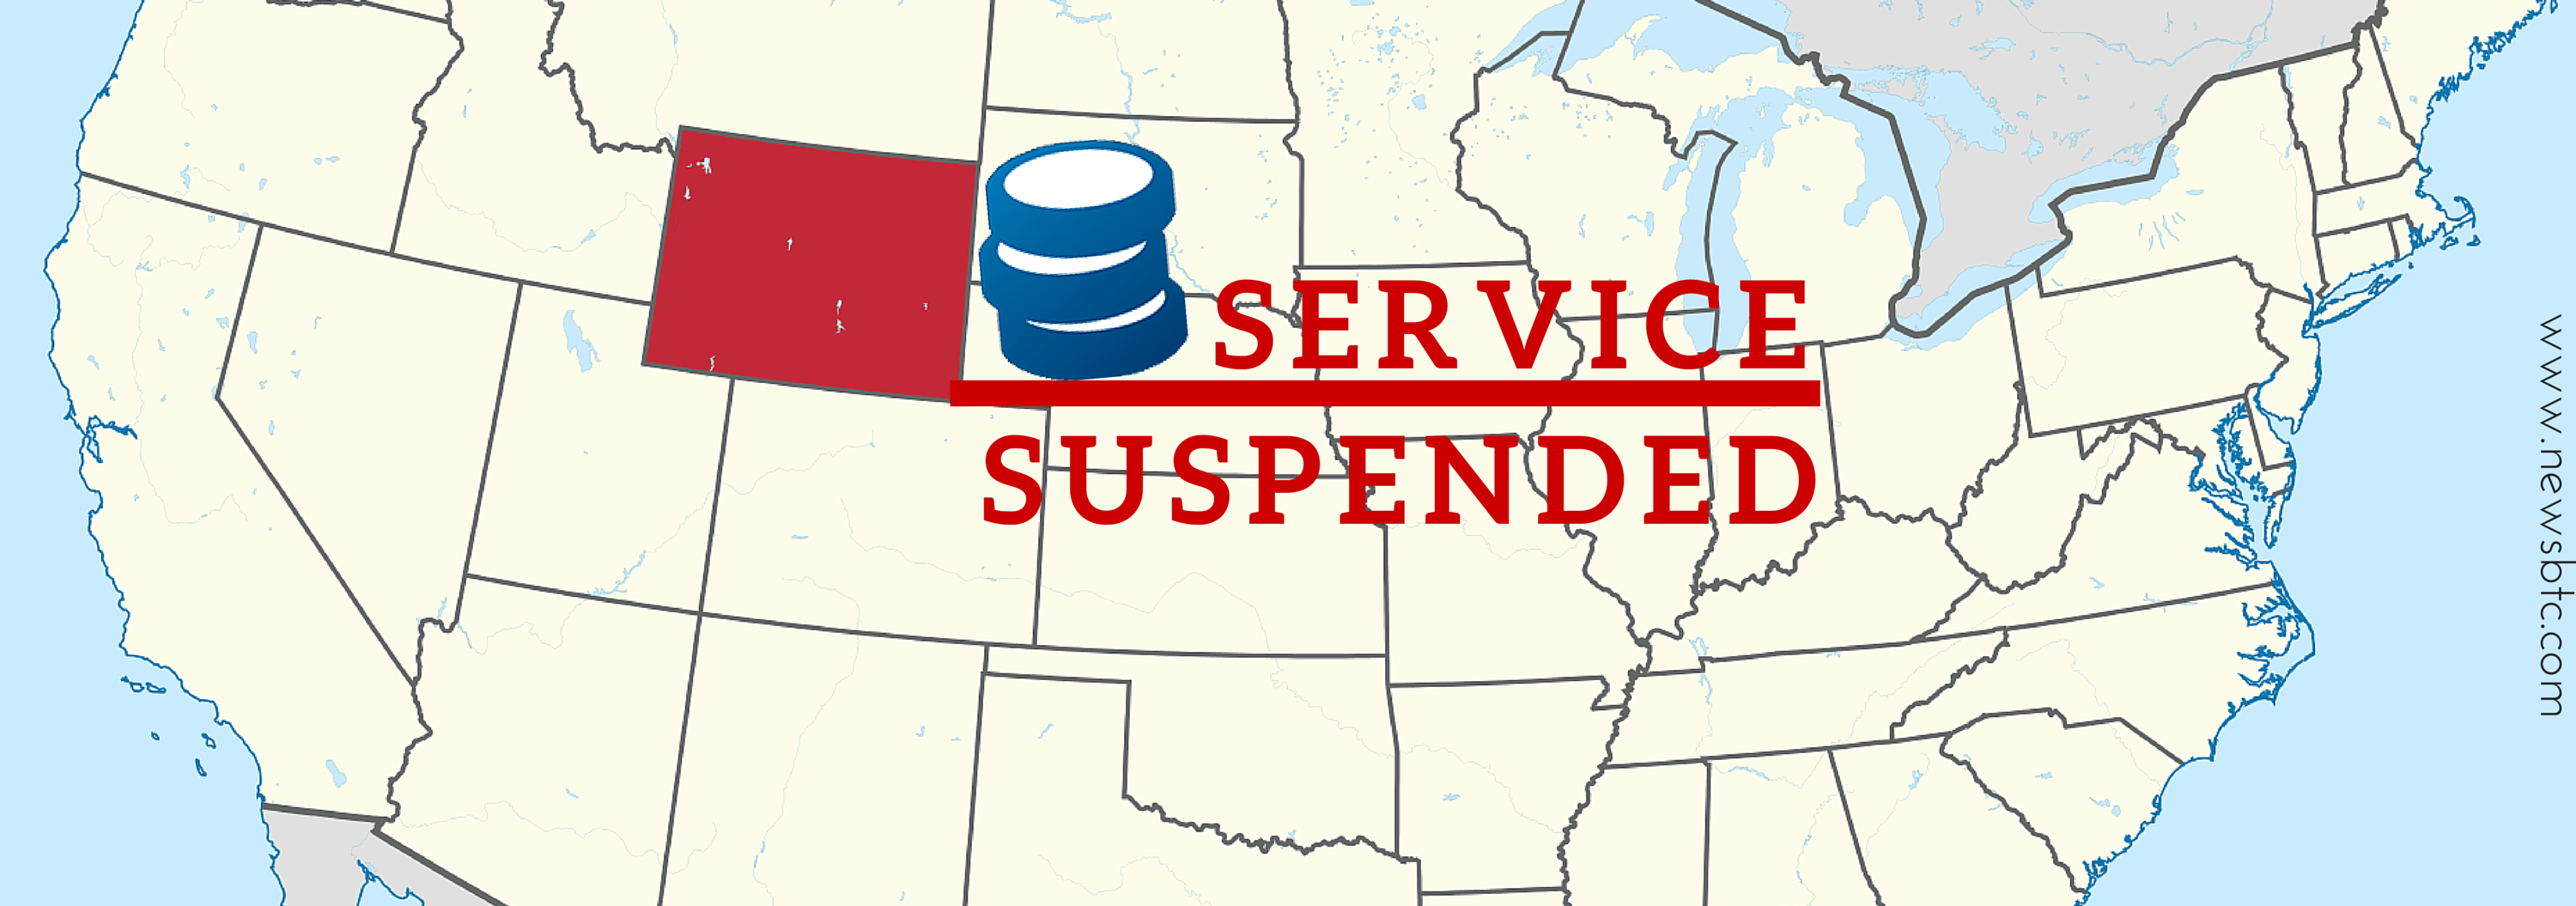 coinbase wyoming service suspended